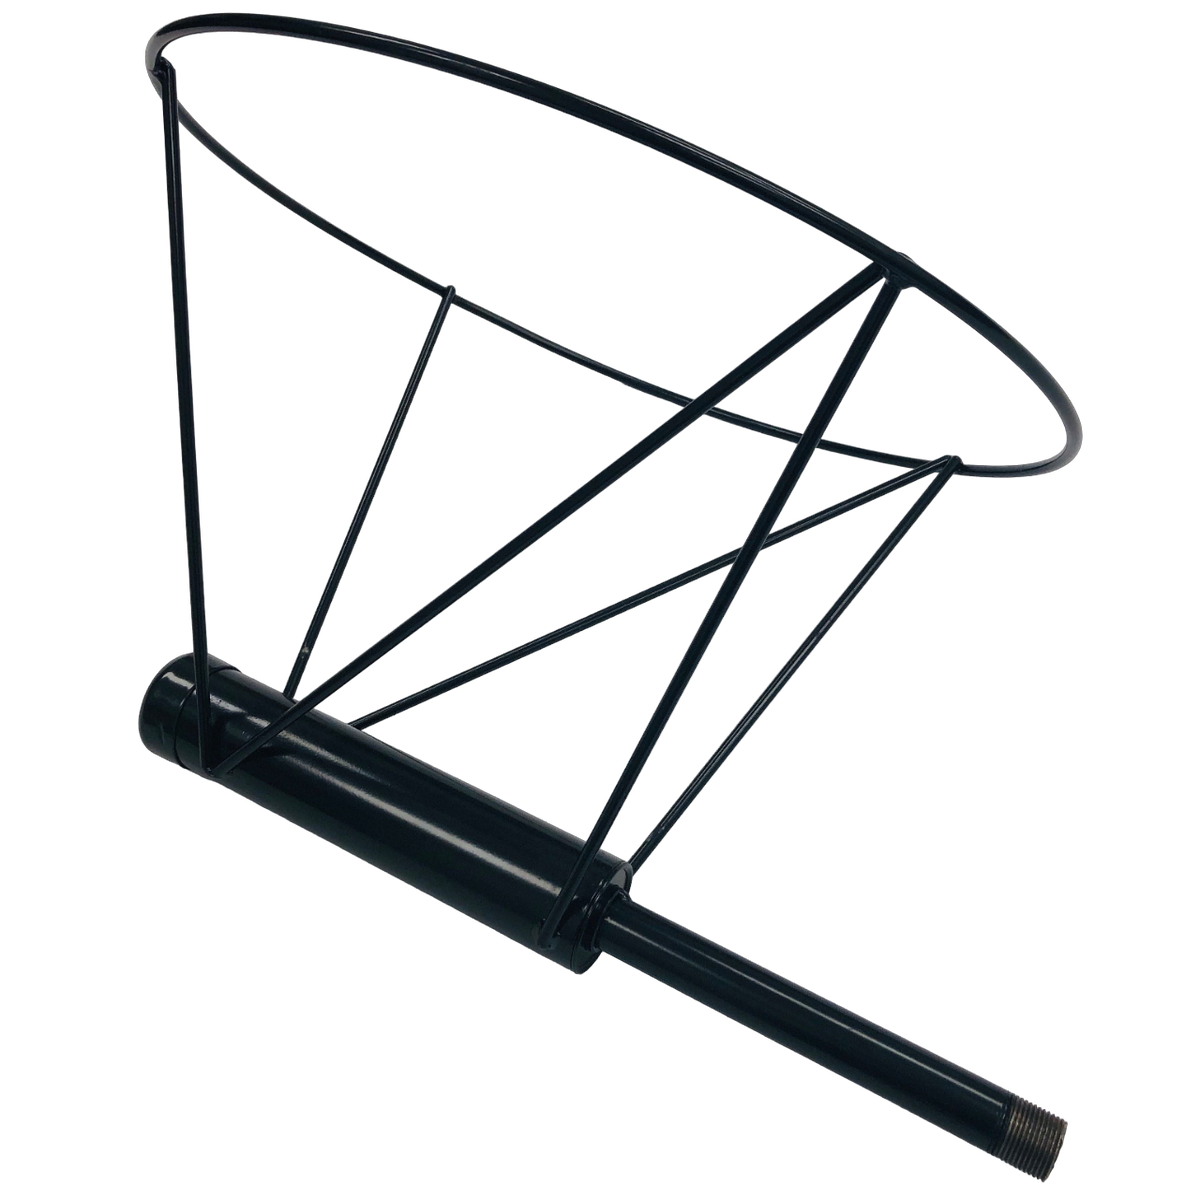 Heavy Duty Windsock frame for 18&quot;, 24&quot; and 36&quot; diameter windsocks. Double ball bearing frame.